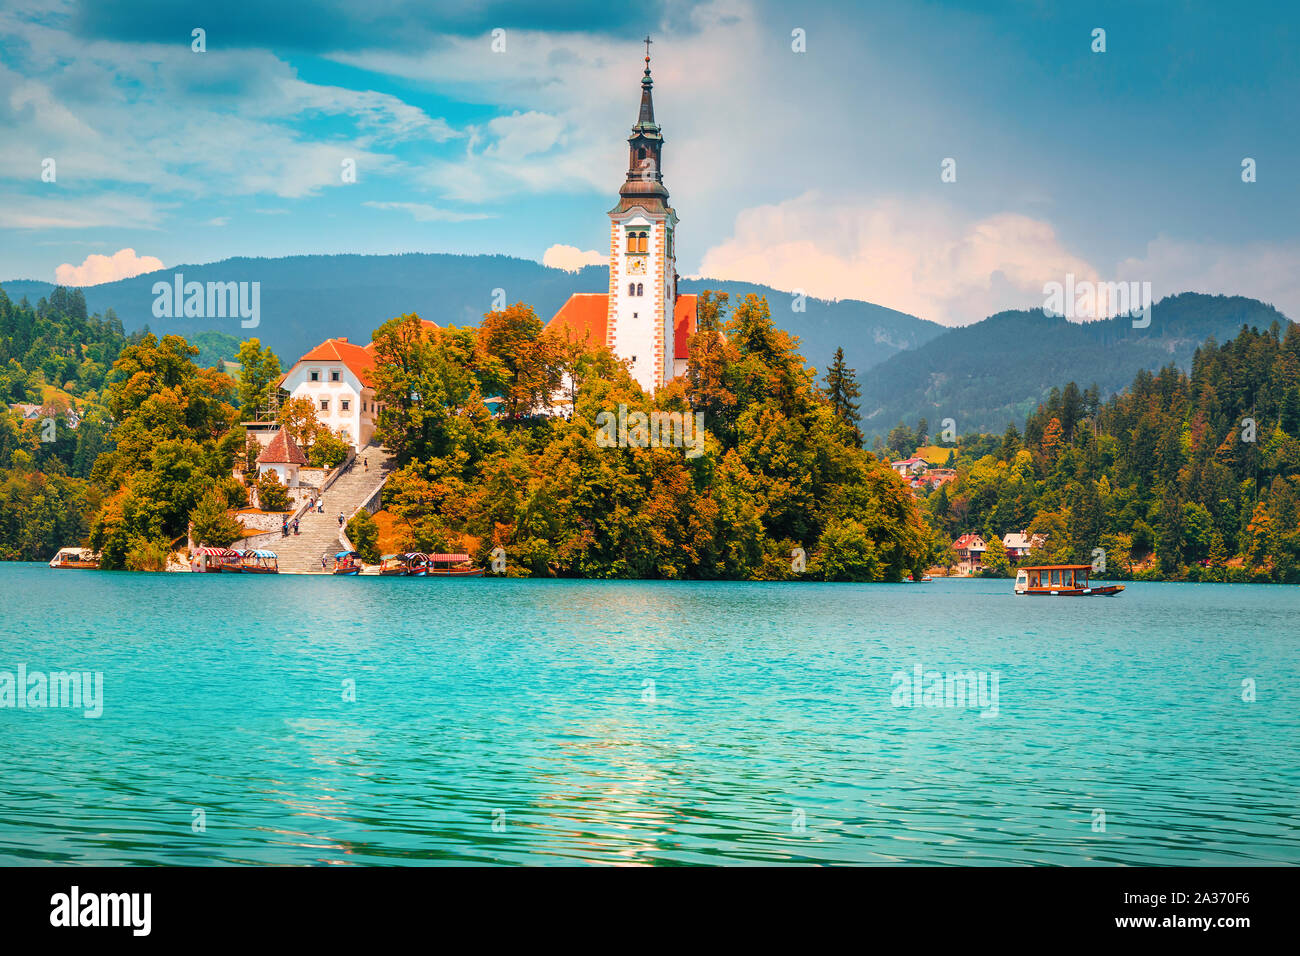 Breathtaking touristic and excursion place at autumn. Spectacular and majestic lake Bled with famous Pilgrimage church on small island, Bled, Slovenia Stock Photo